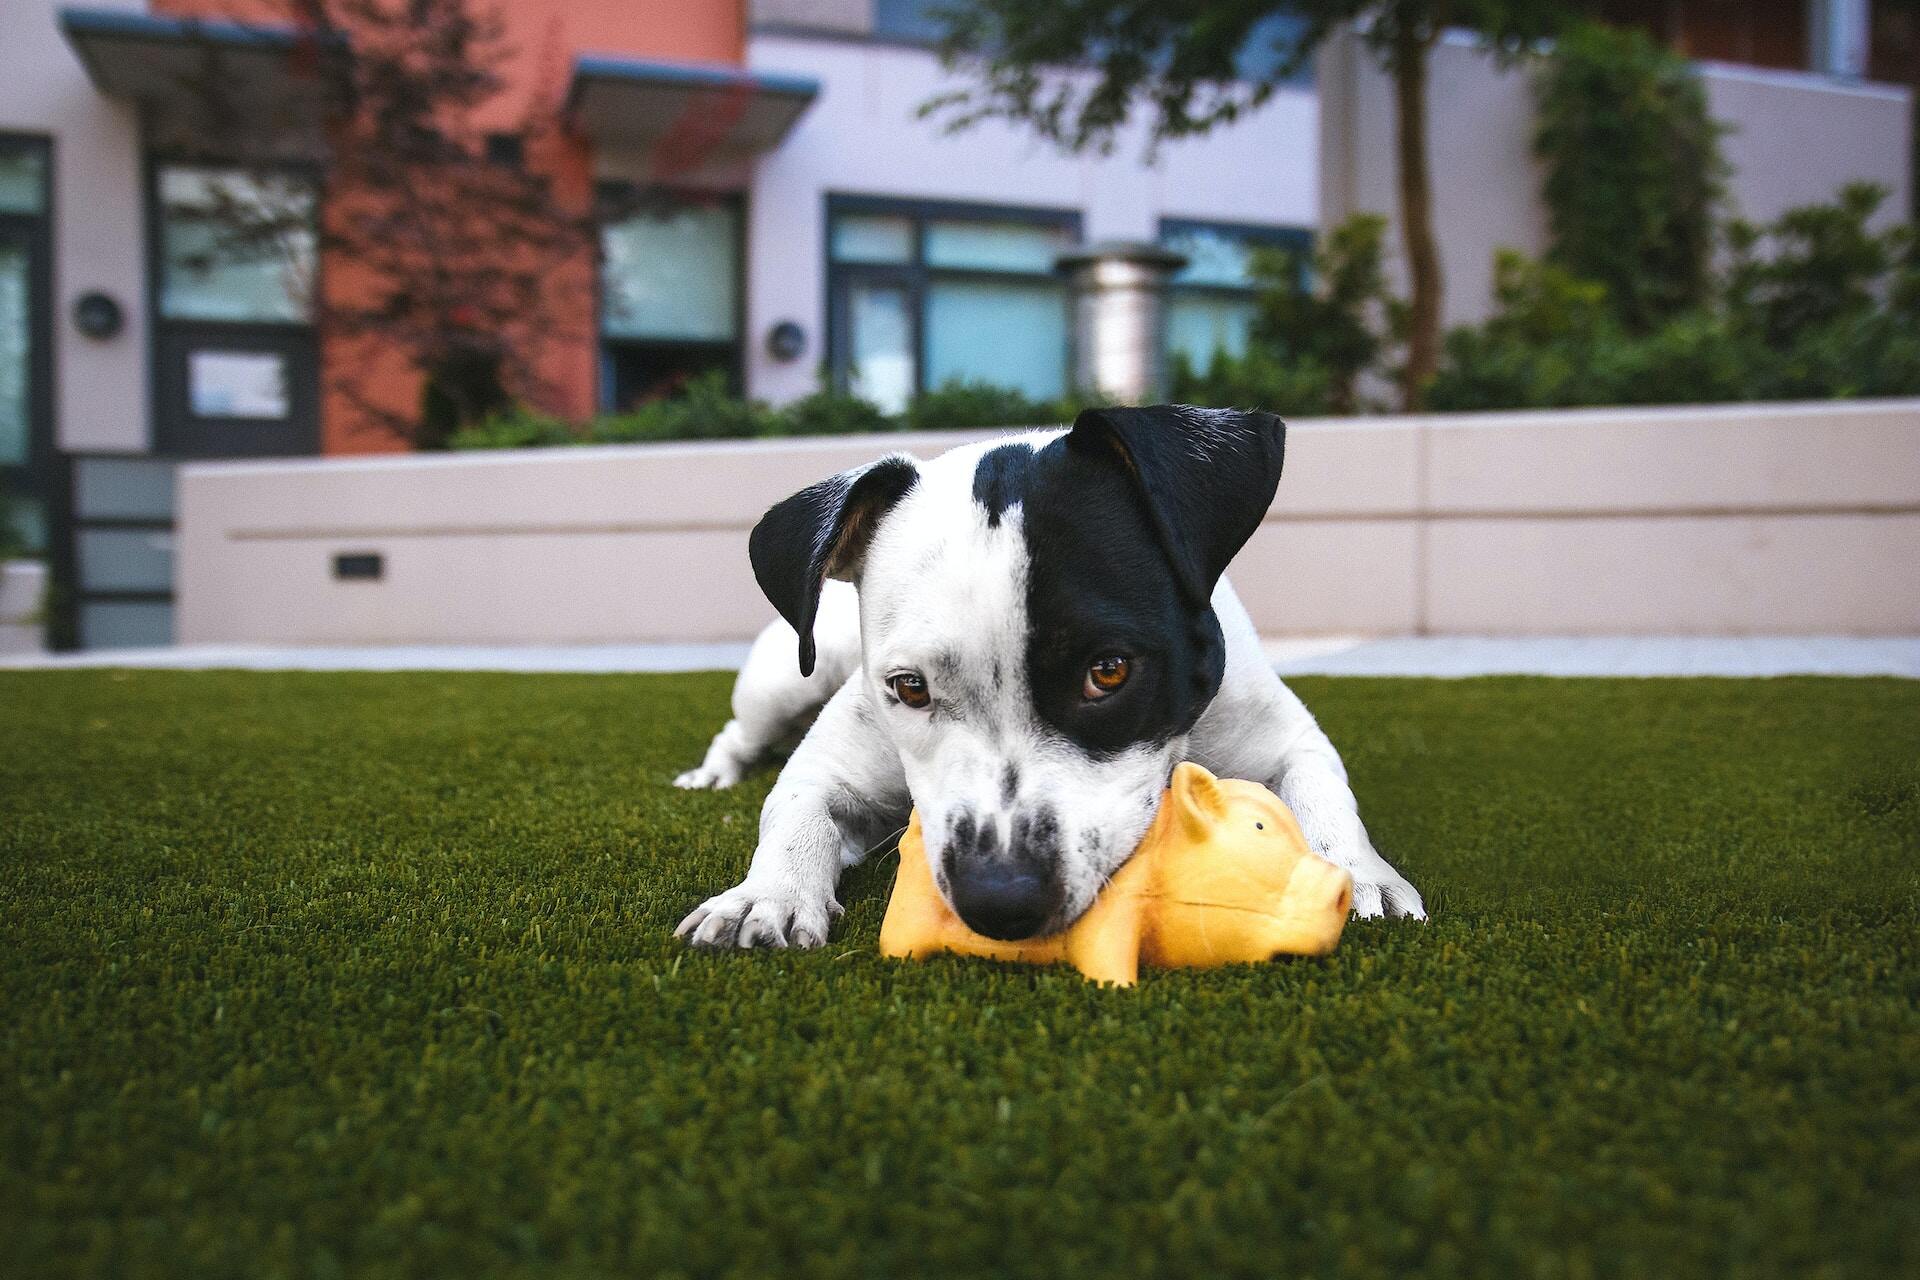 A dog chewing on a rubber toy in a lawn